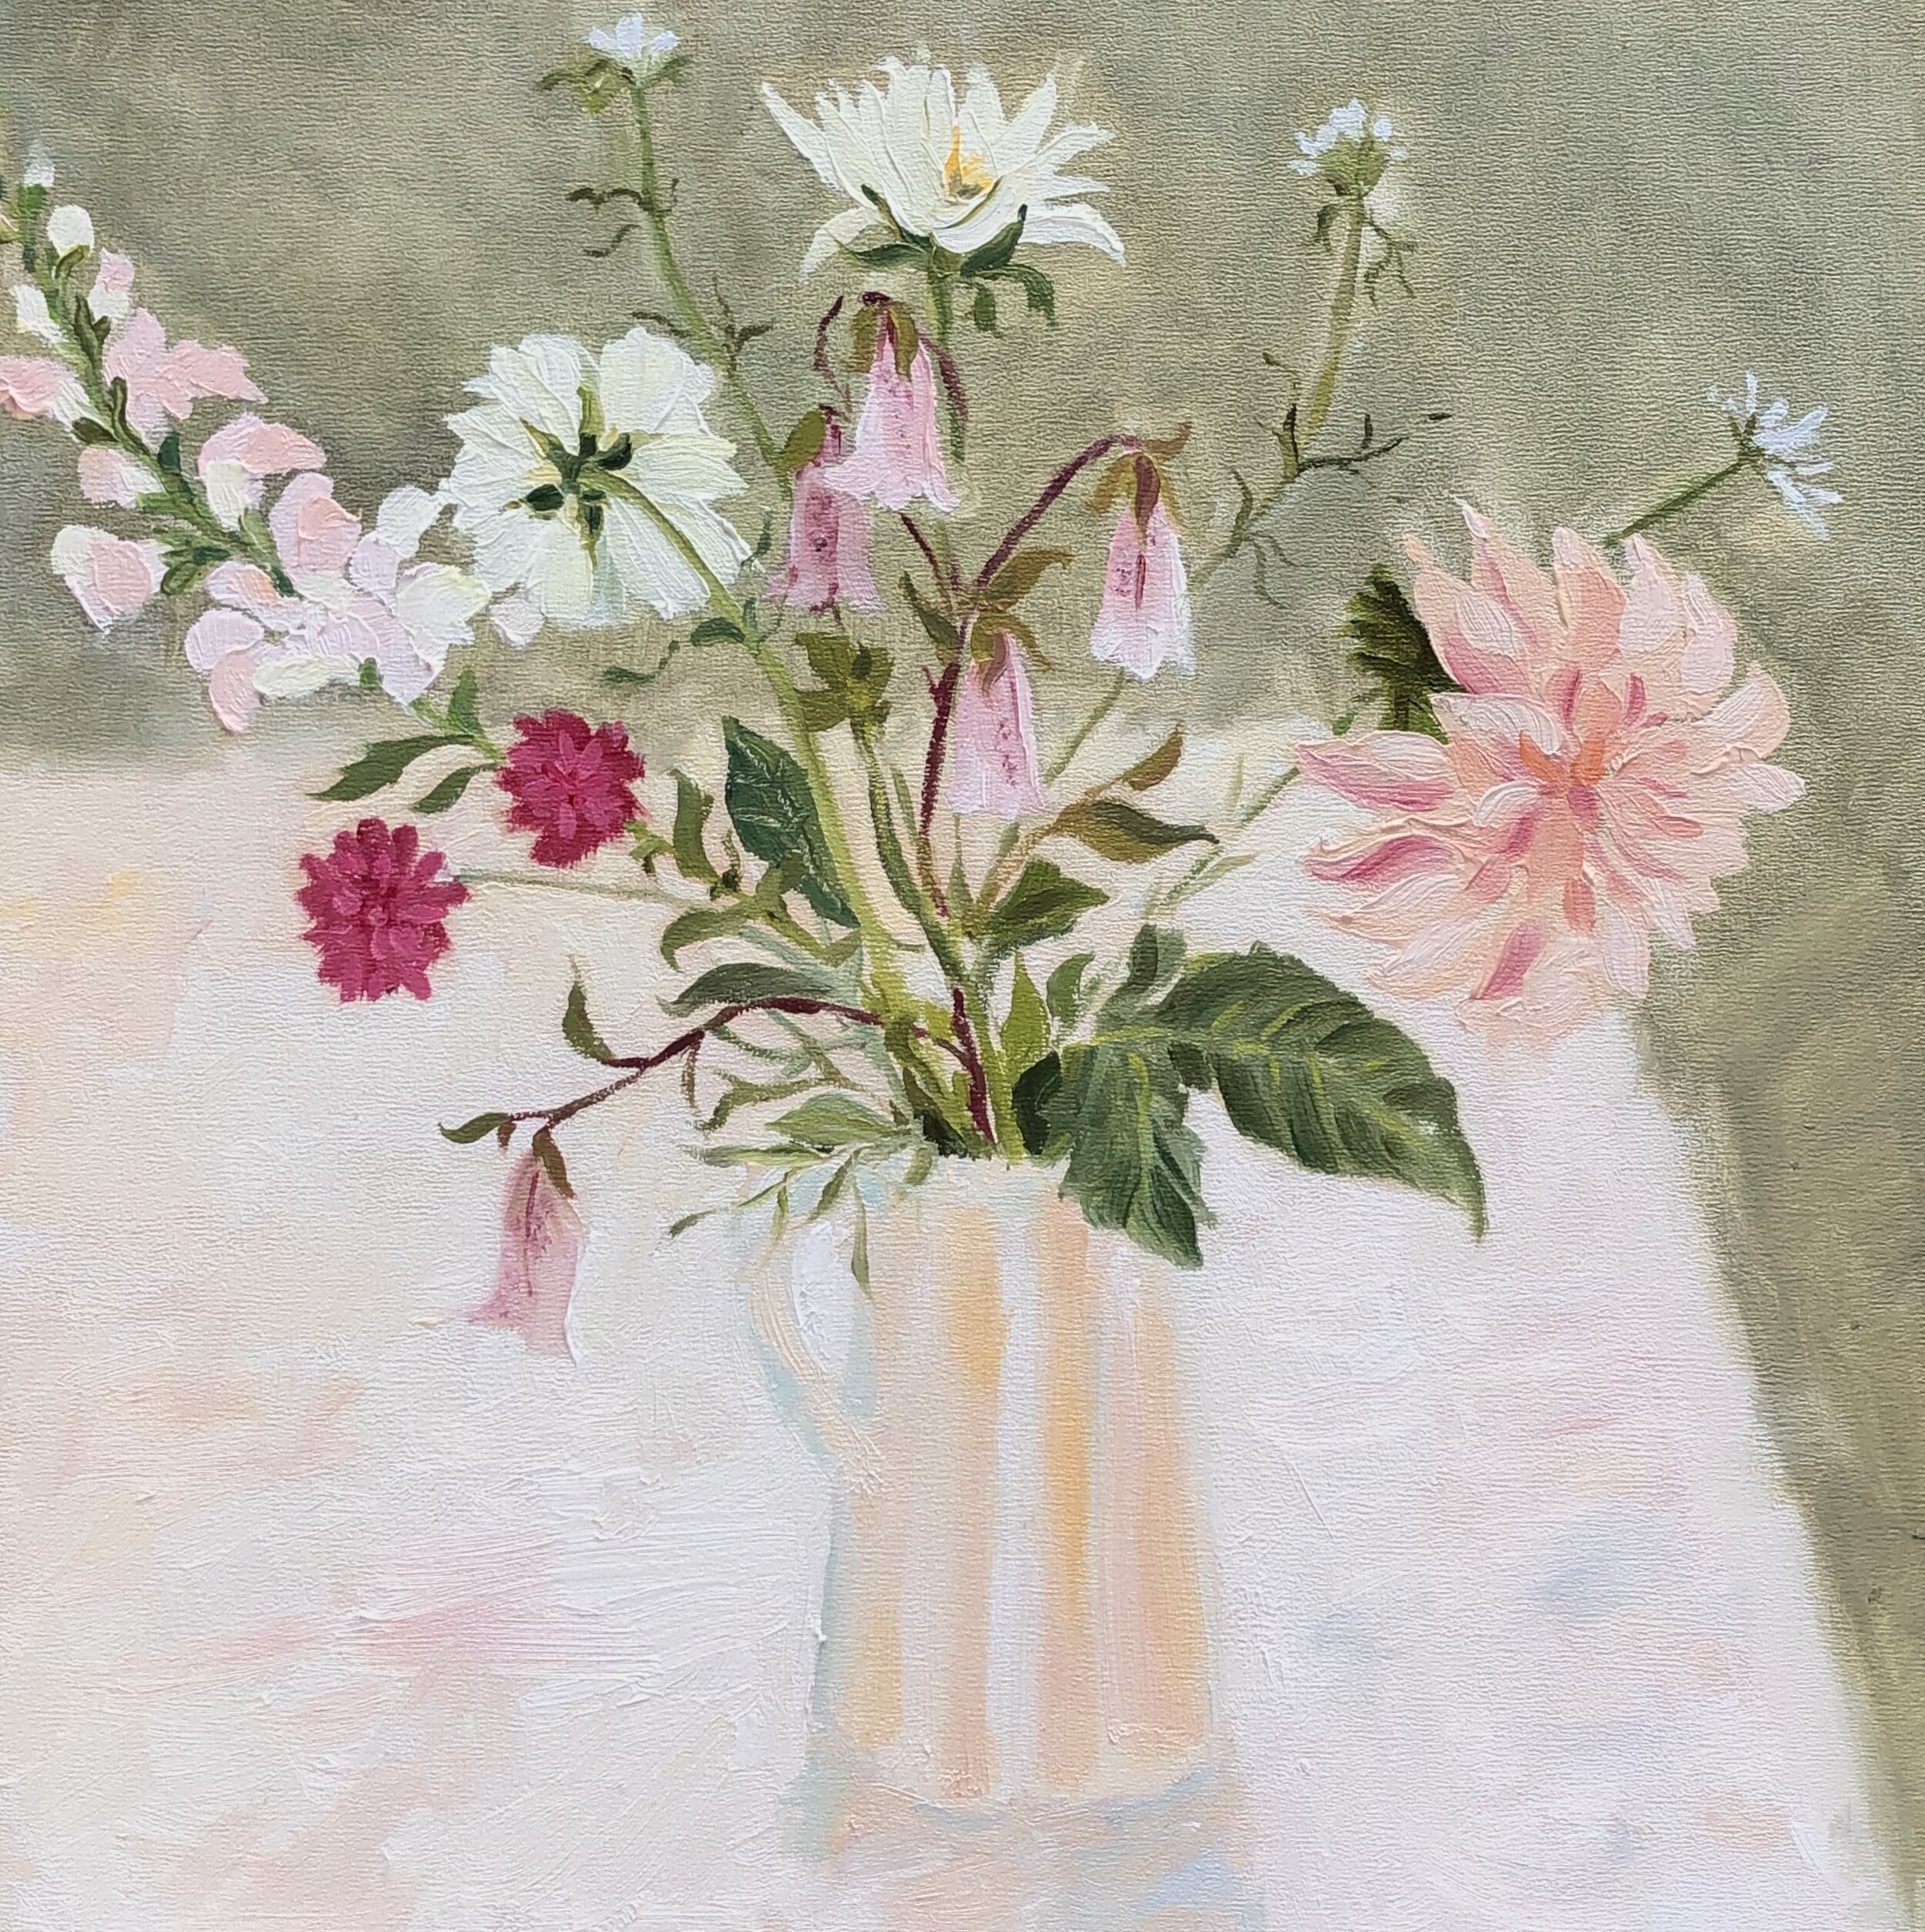 Snapdragons and dahlias, 20cm x 20cm oil on panel. Sold